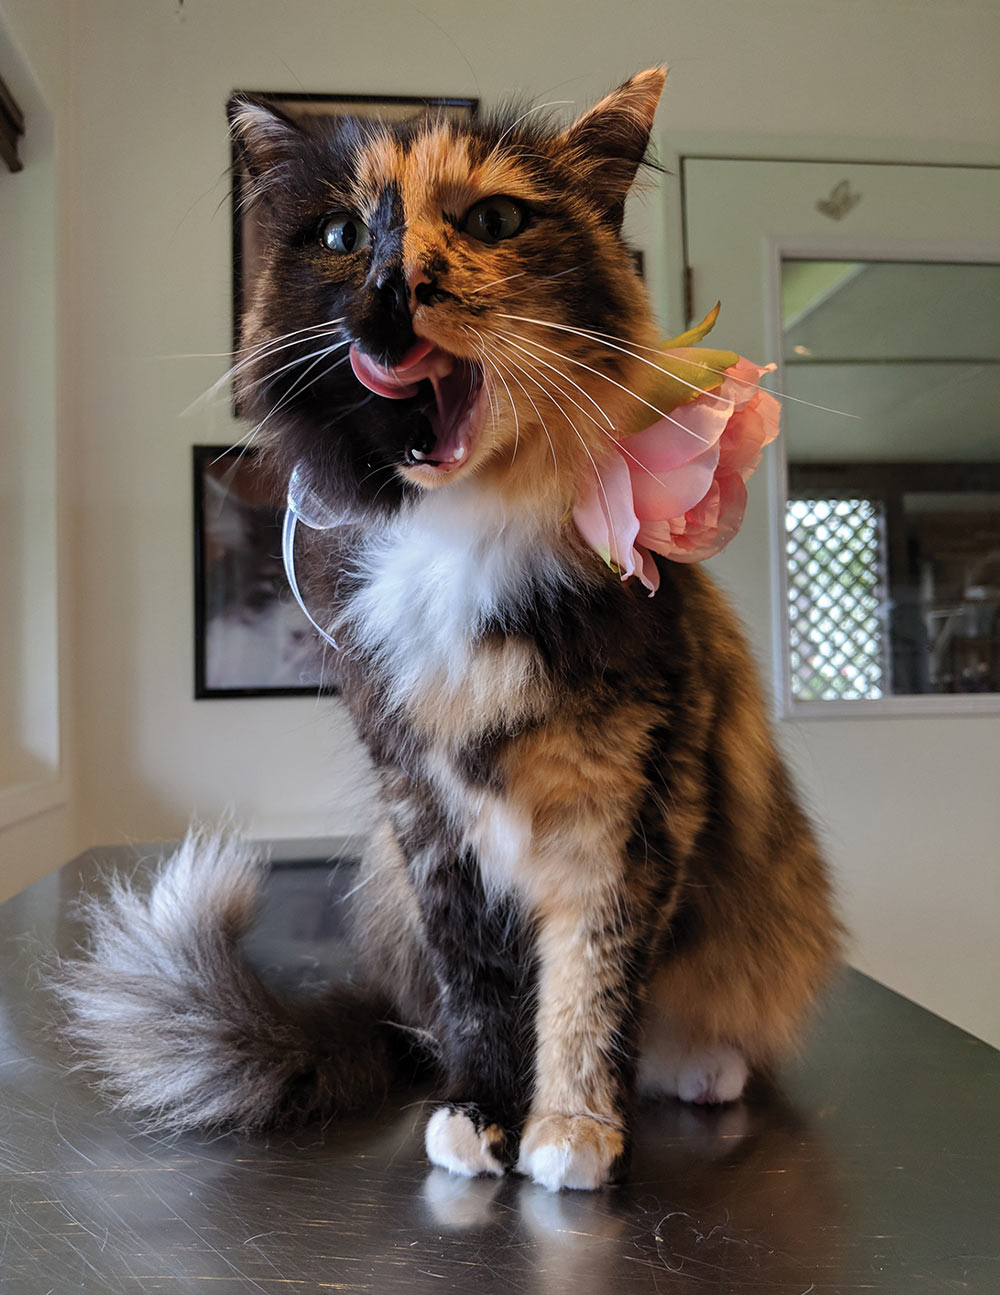 close low angle view of a Tortoiseshell cat collared with a white ribbon an pink rose licking its chops while sitting on a grooming table